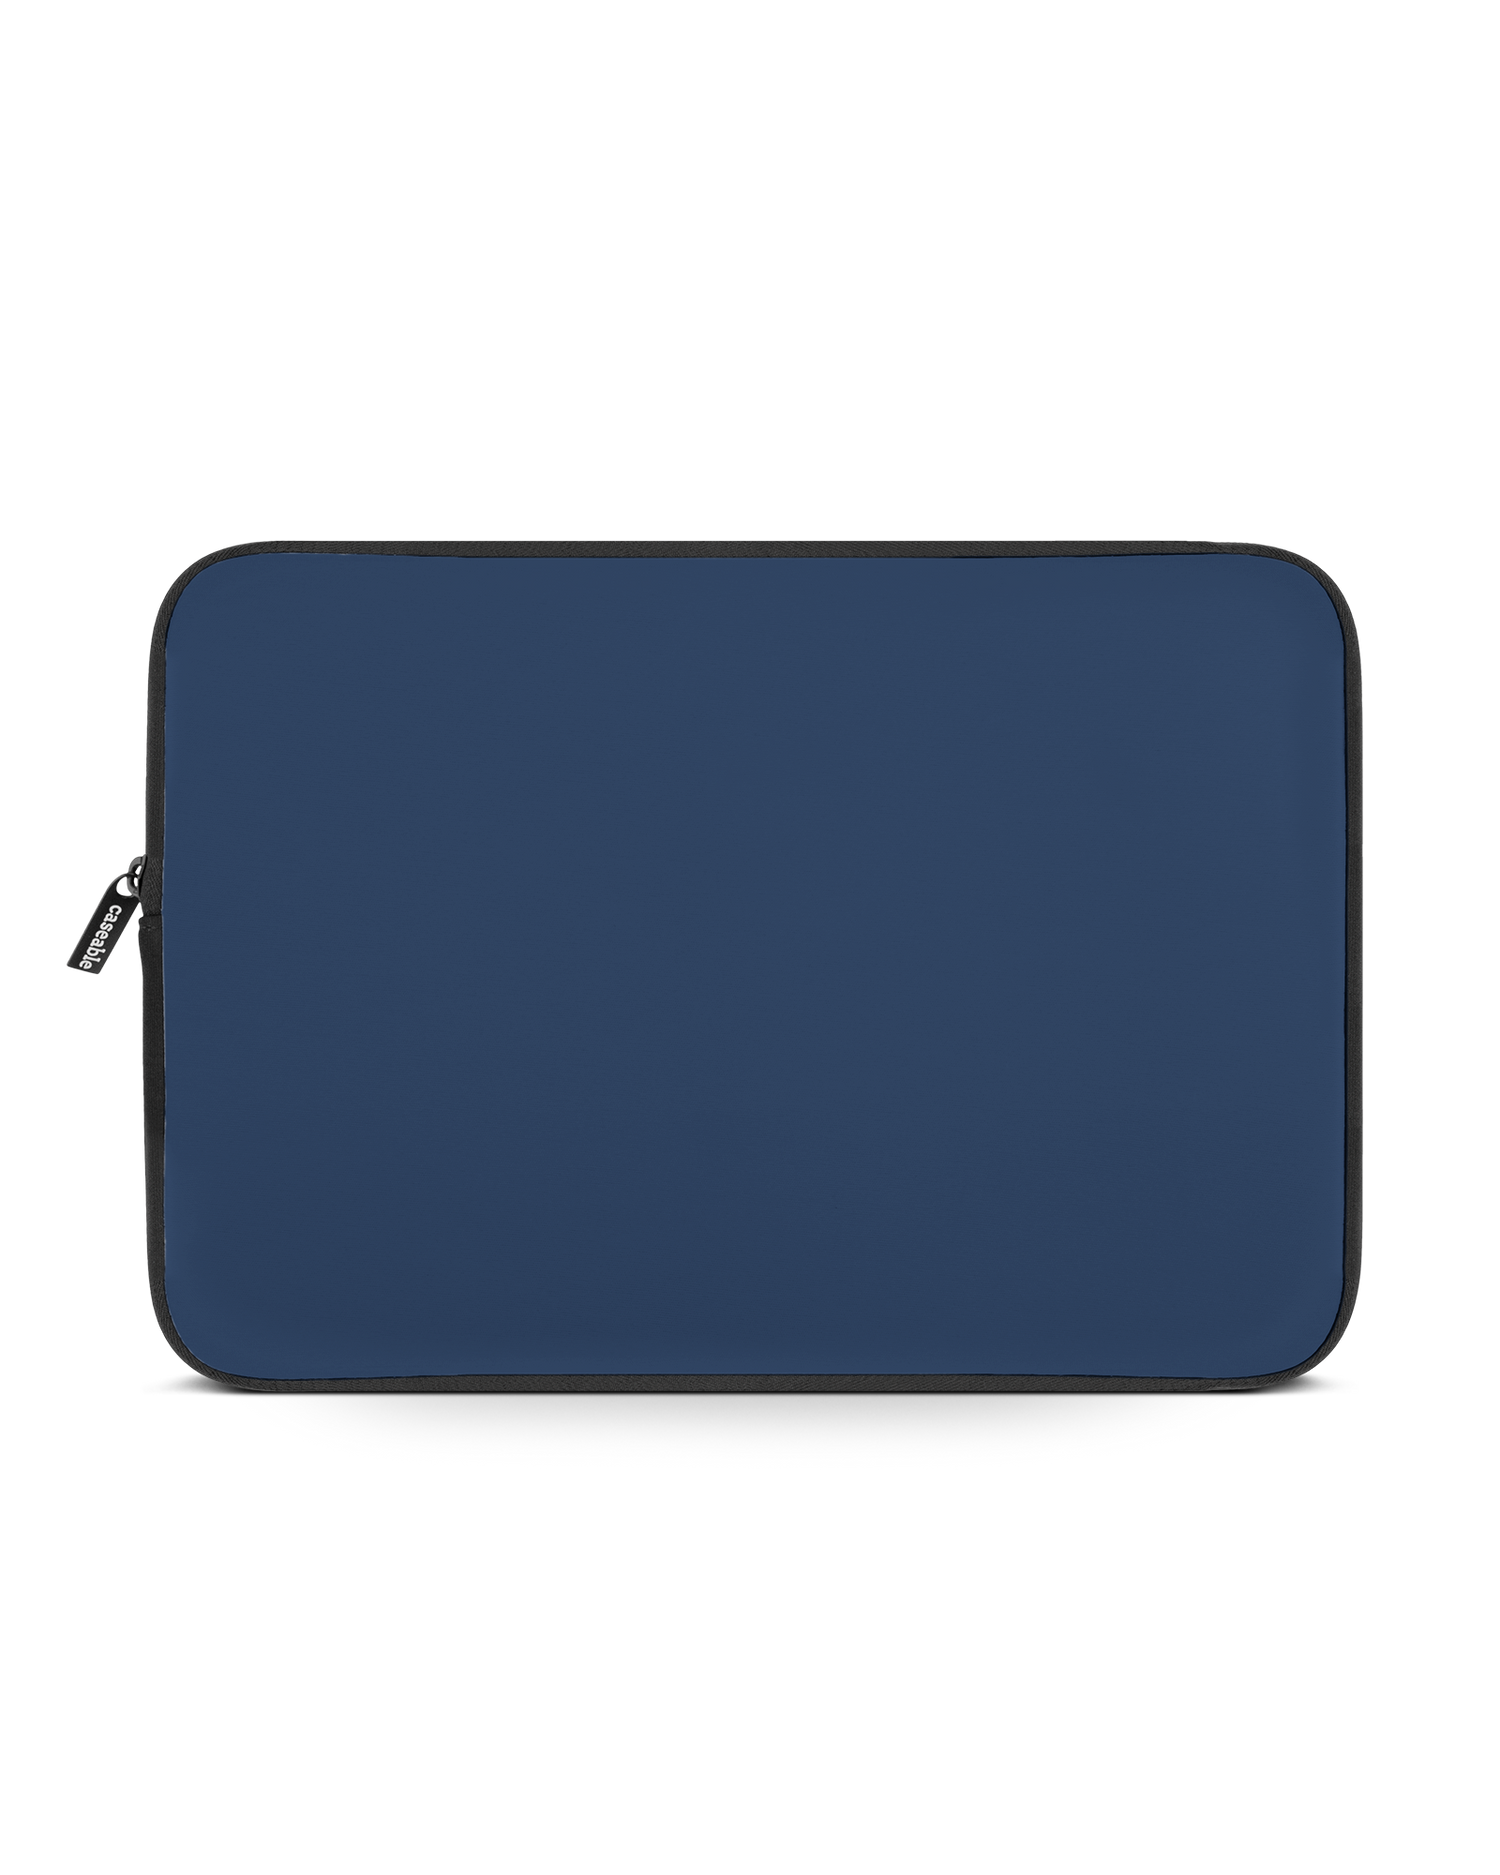 NAVY Laptop Case 15-16 inch: Front View